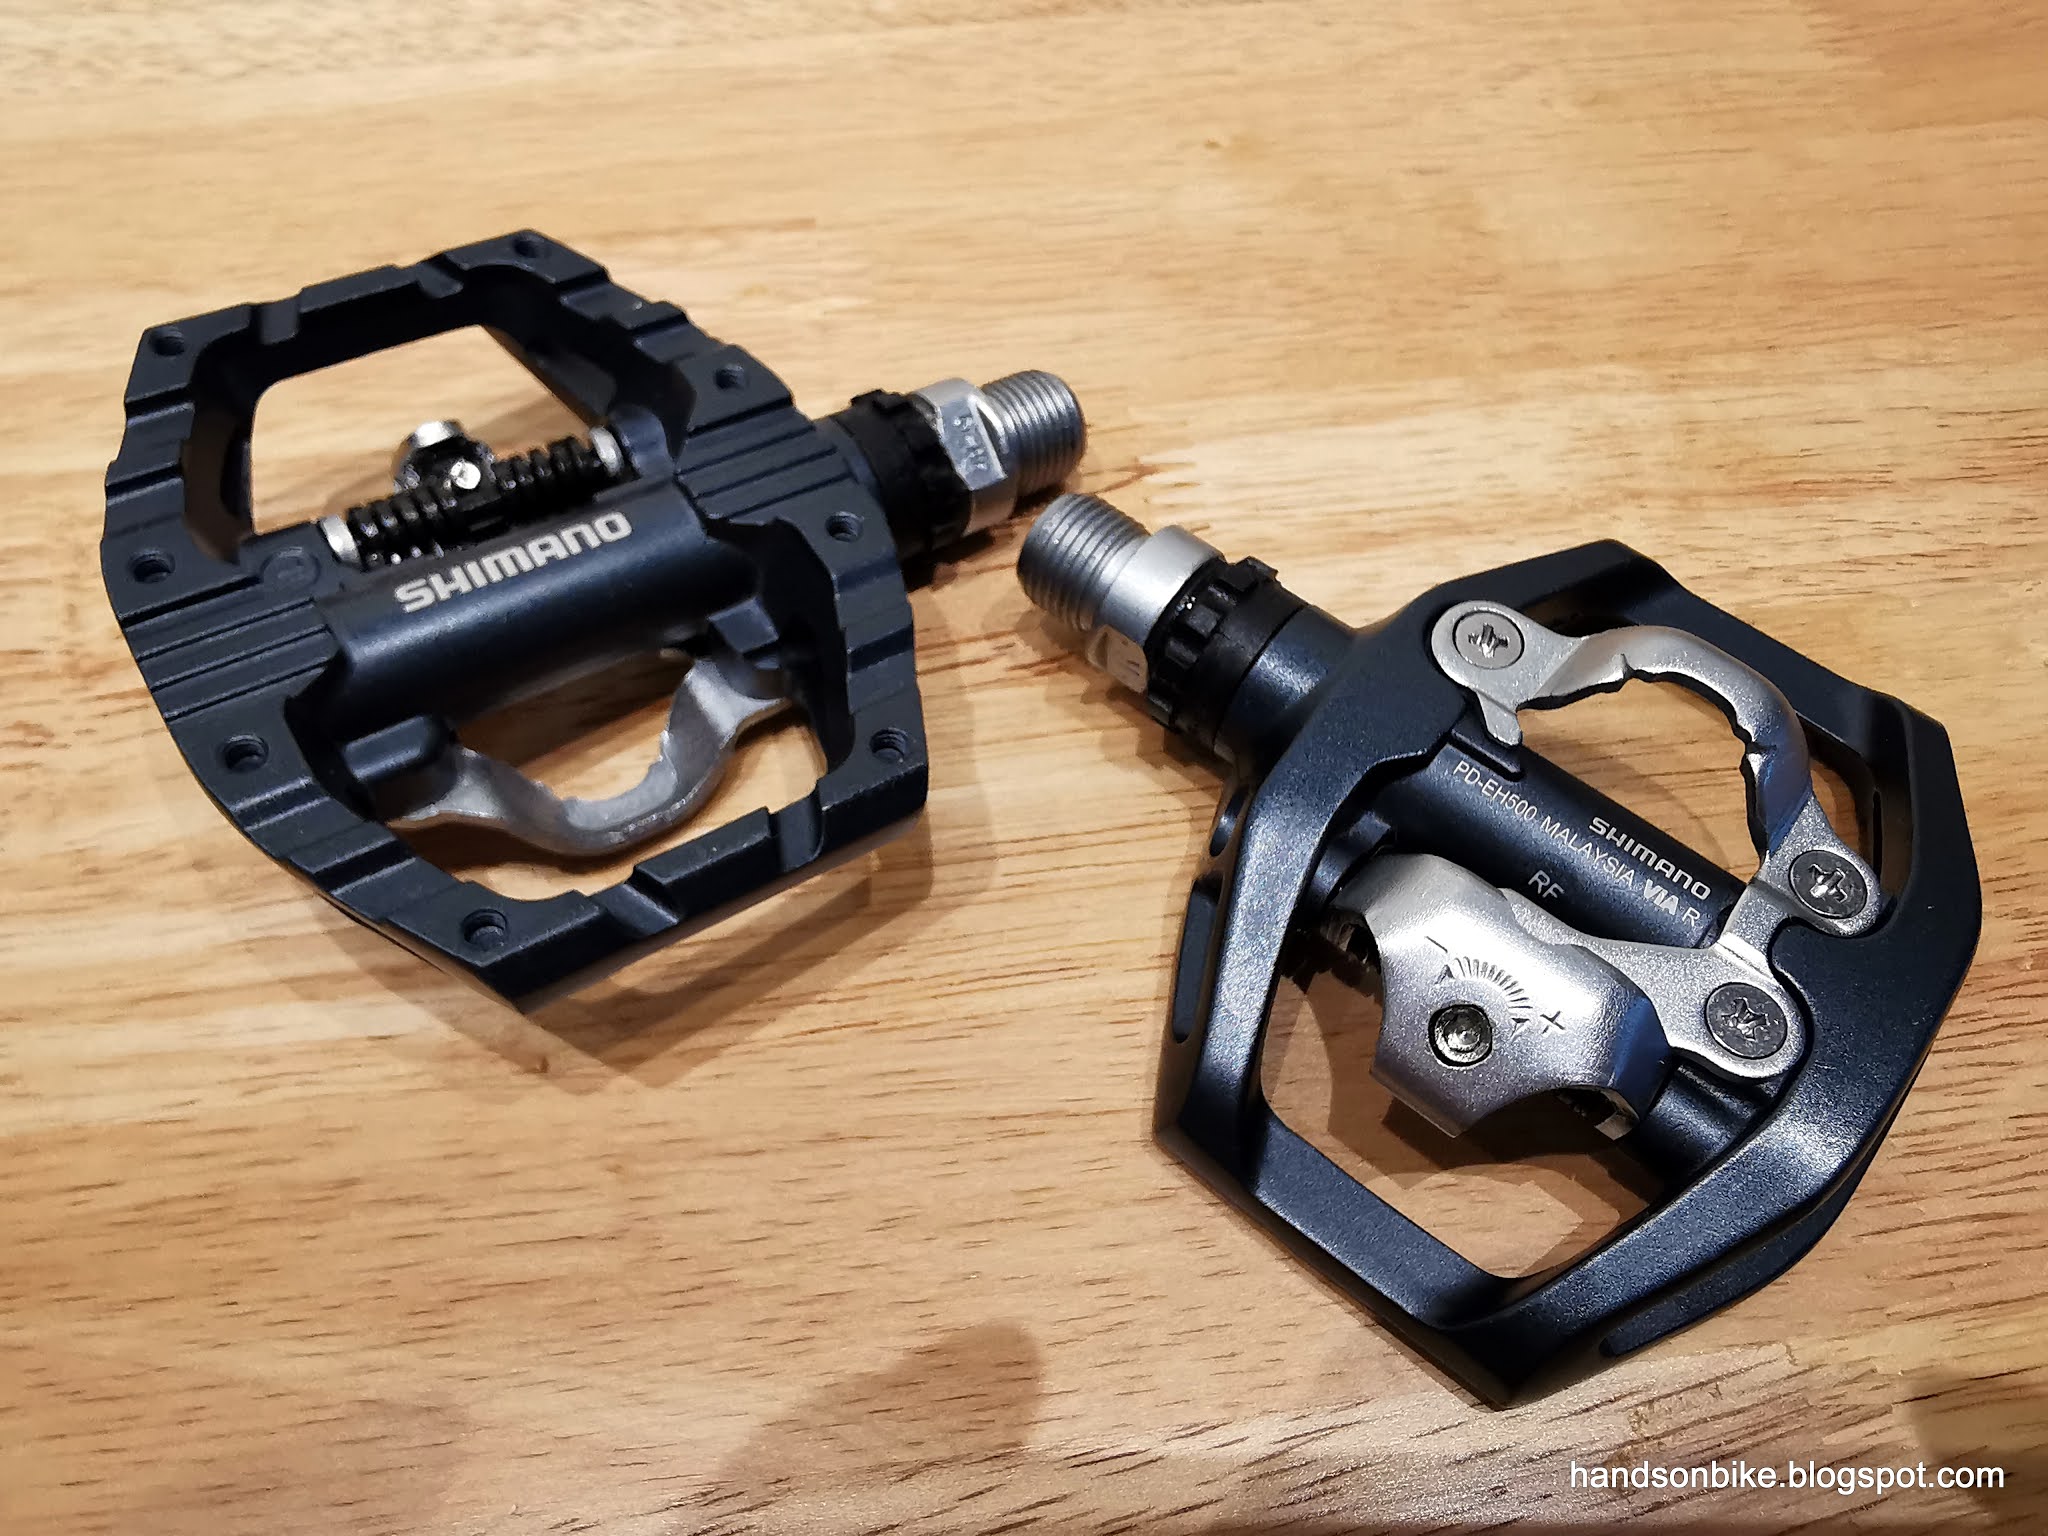 attent Mammoet Reserveren Hands On Bike: Shimano Dual-Sided SPD/Flat Pedals: PD-A530 vs PD-EH500